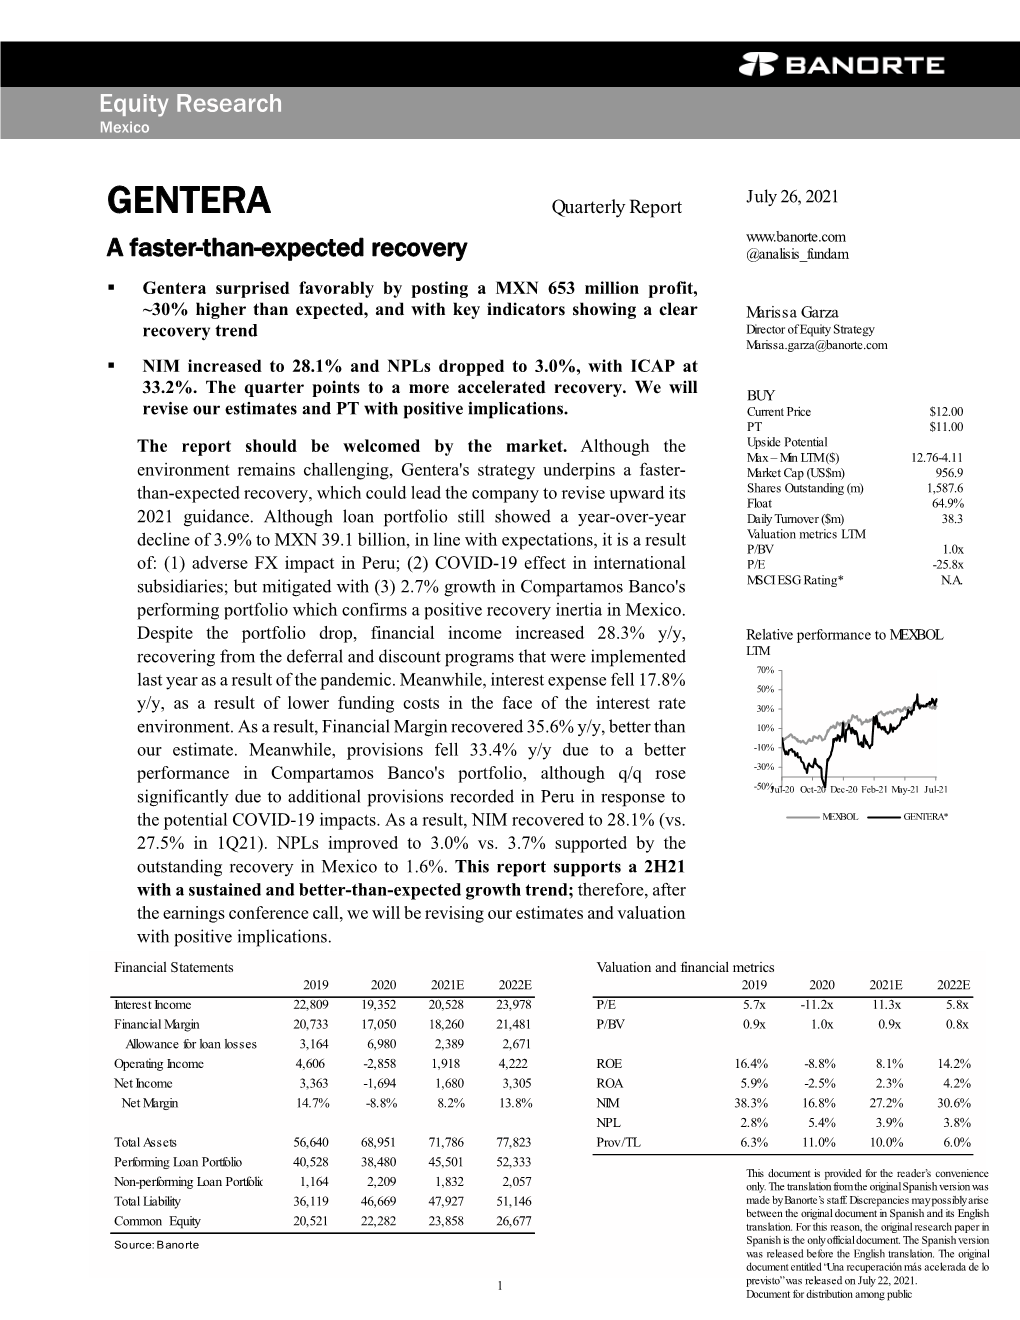 GENTERA a Faster-Than-Expected Recovery @Analisis Fundam